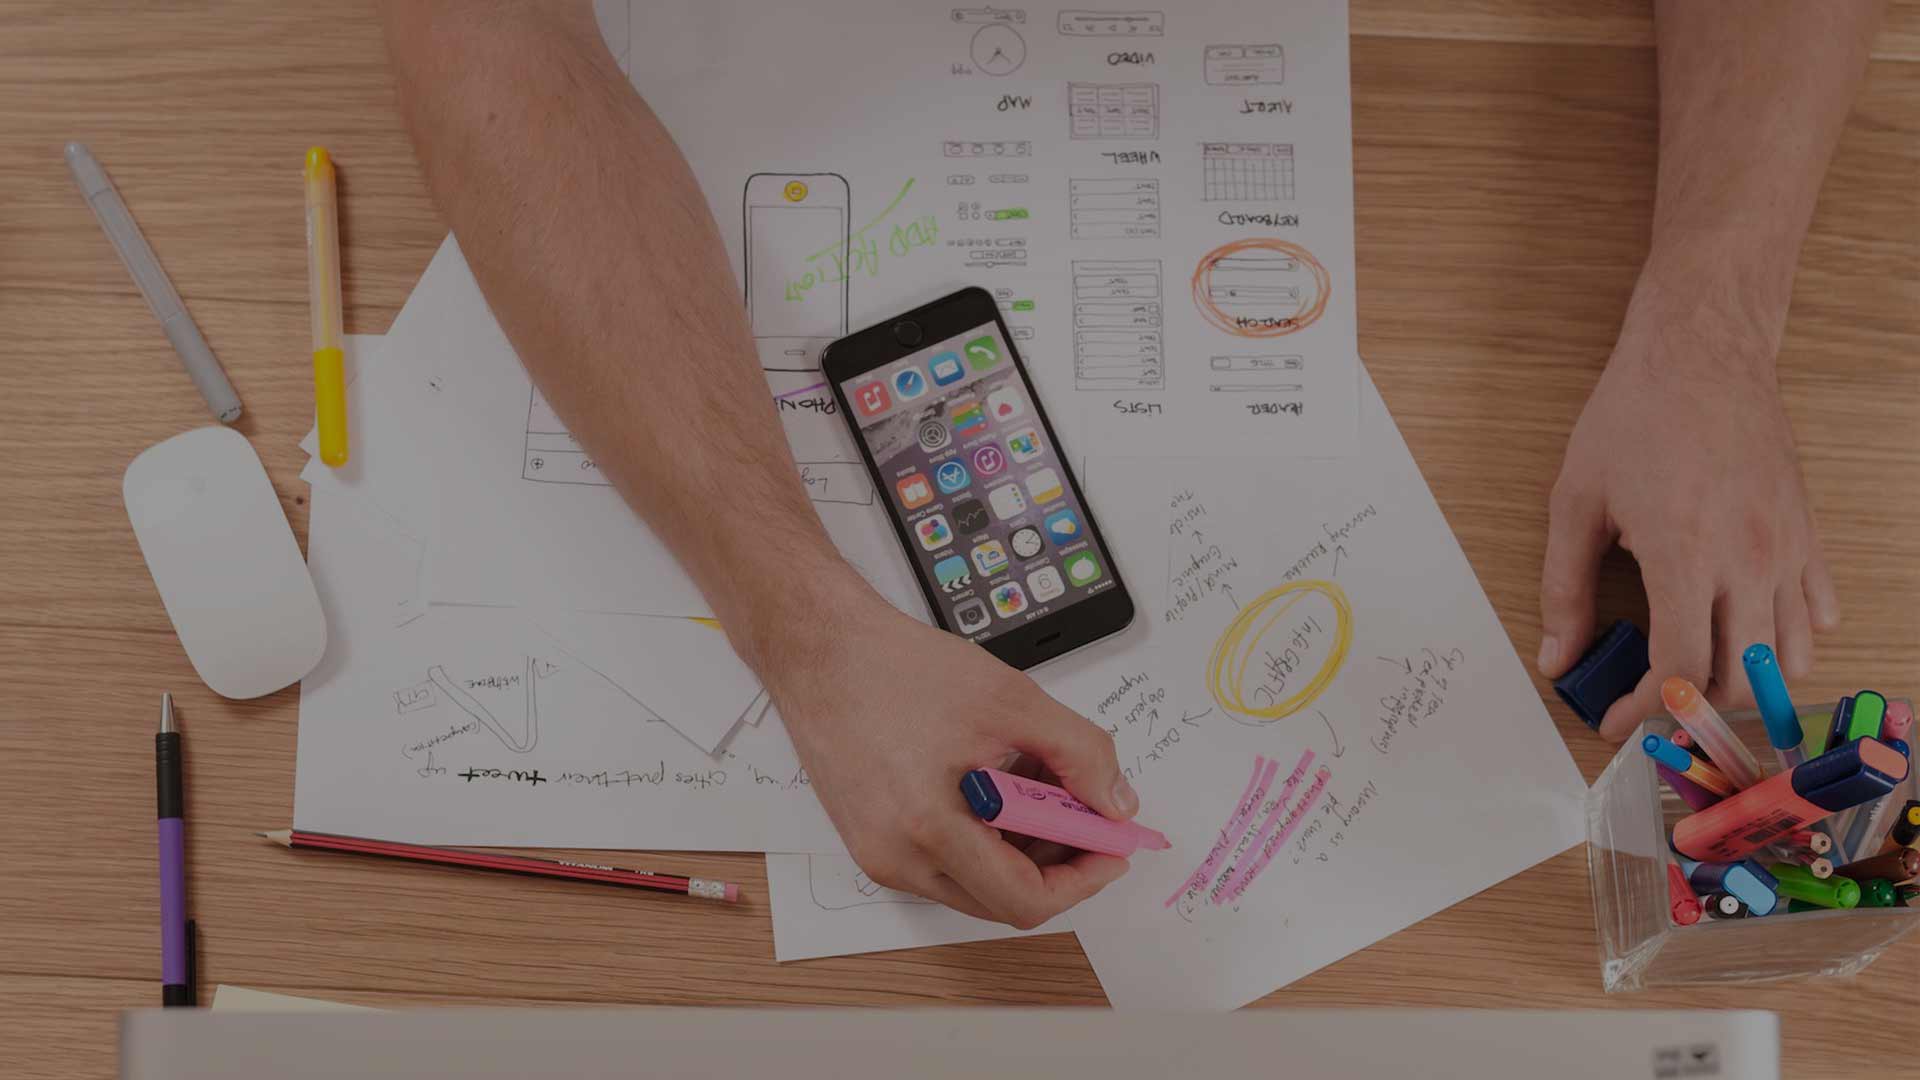 Six Mobile App Development Tips for Small Businesses